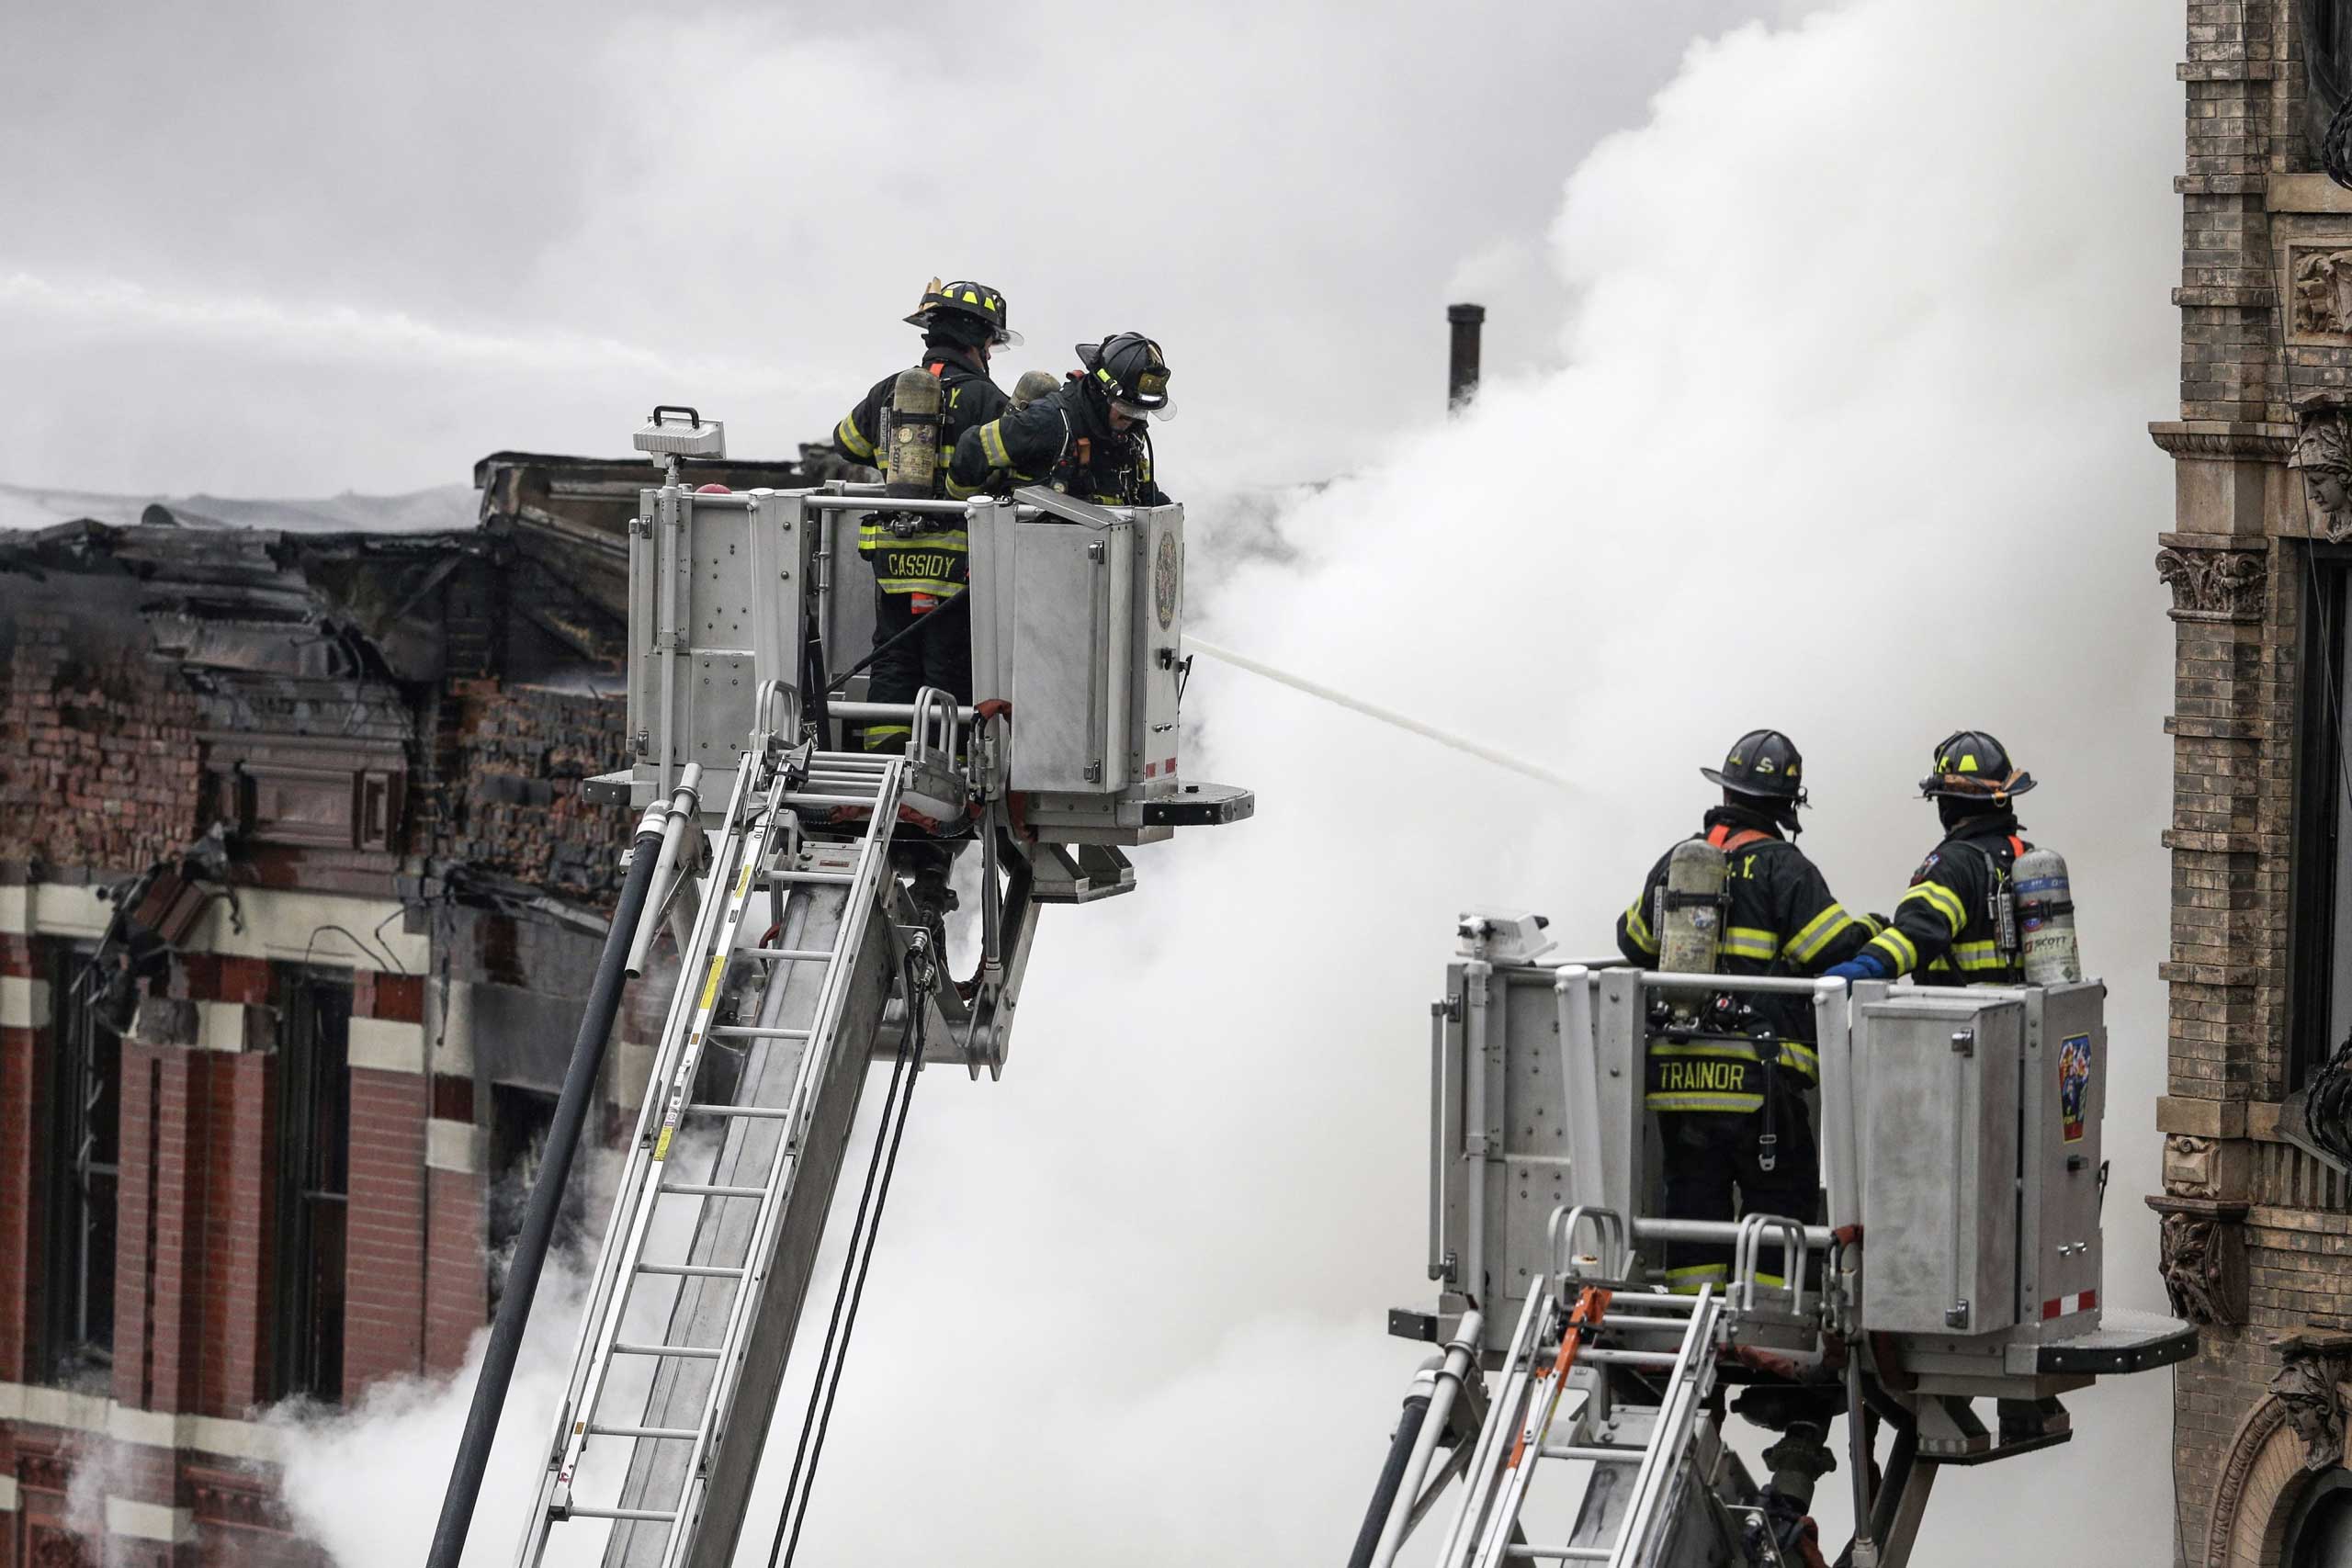 New York City Fire Department firefighters battle a fire in the East Village neighborhood of New York City on March 26, 2015.